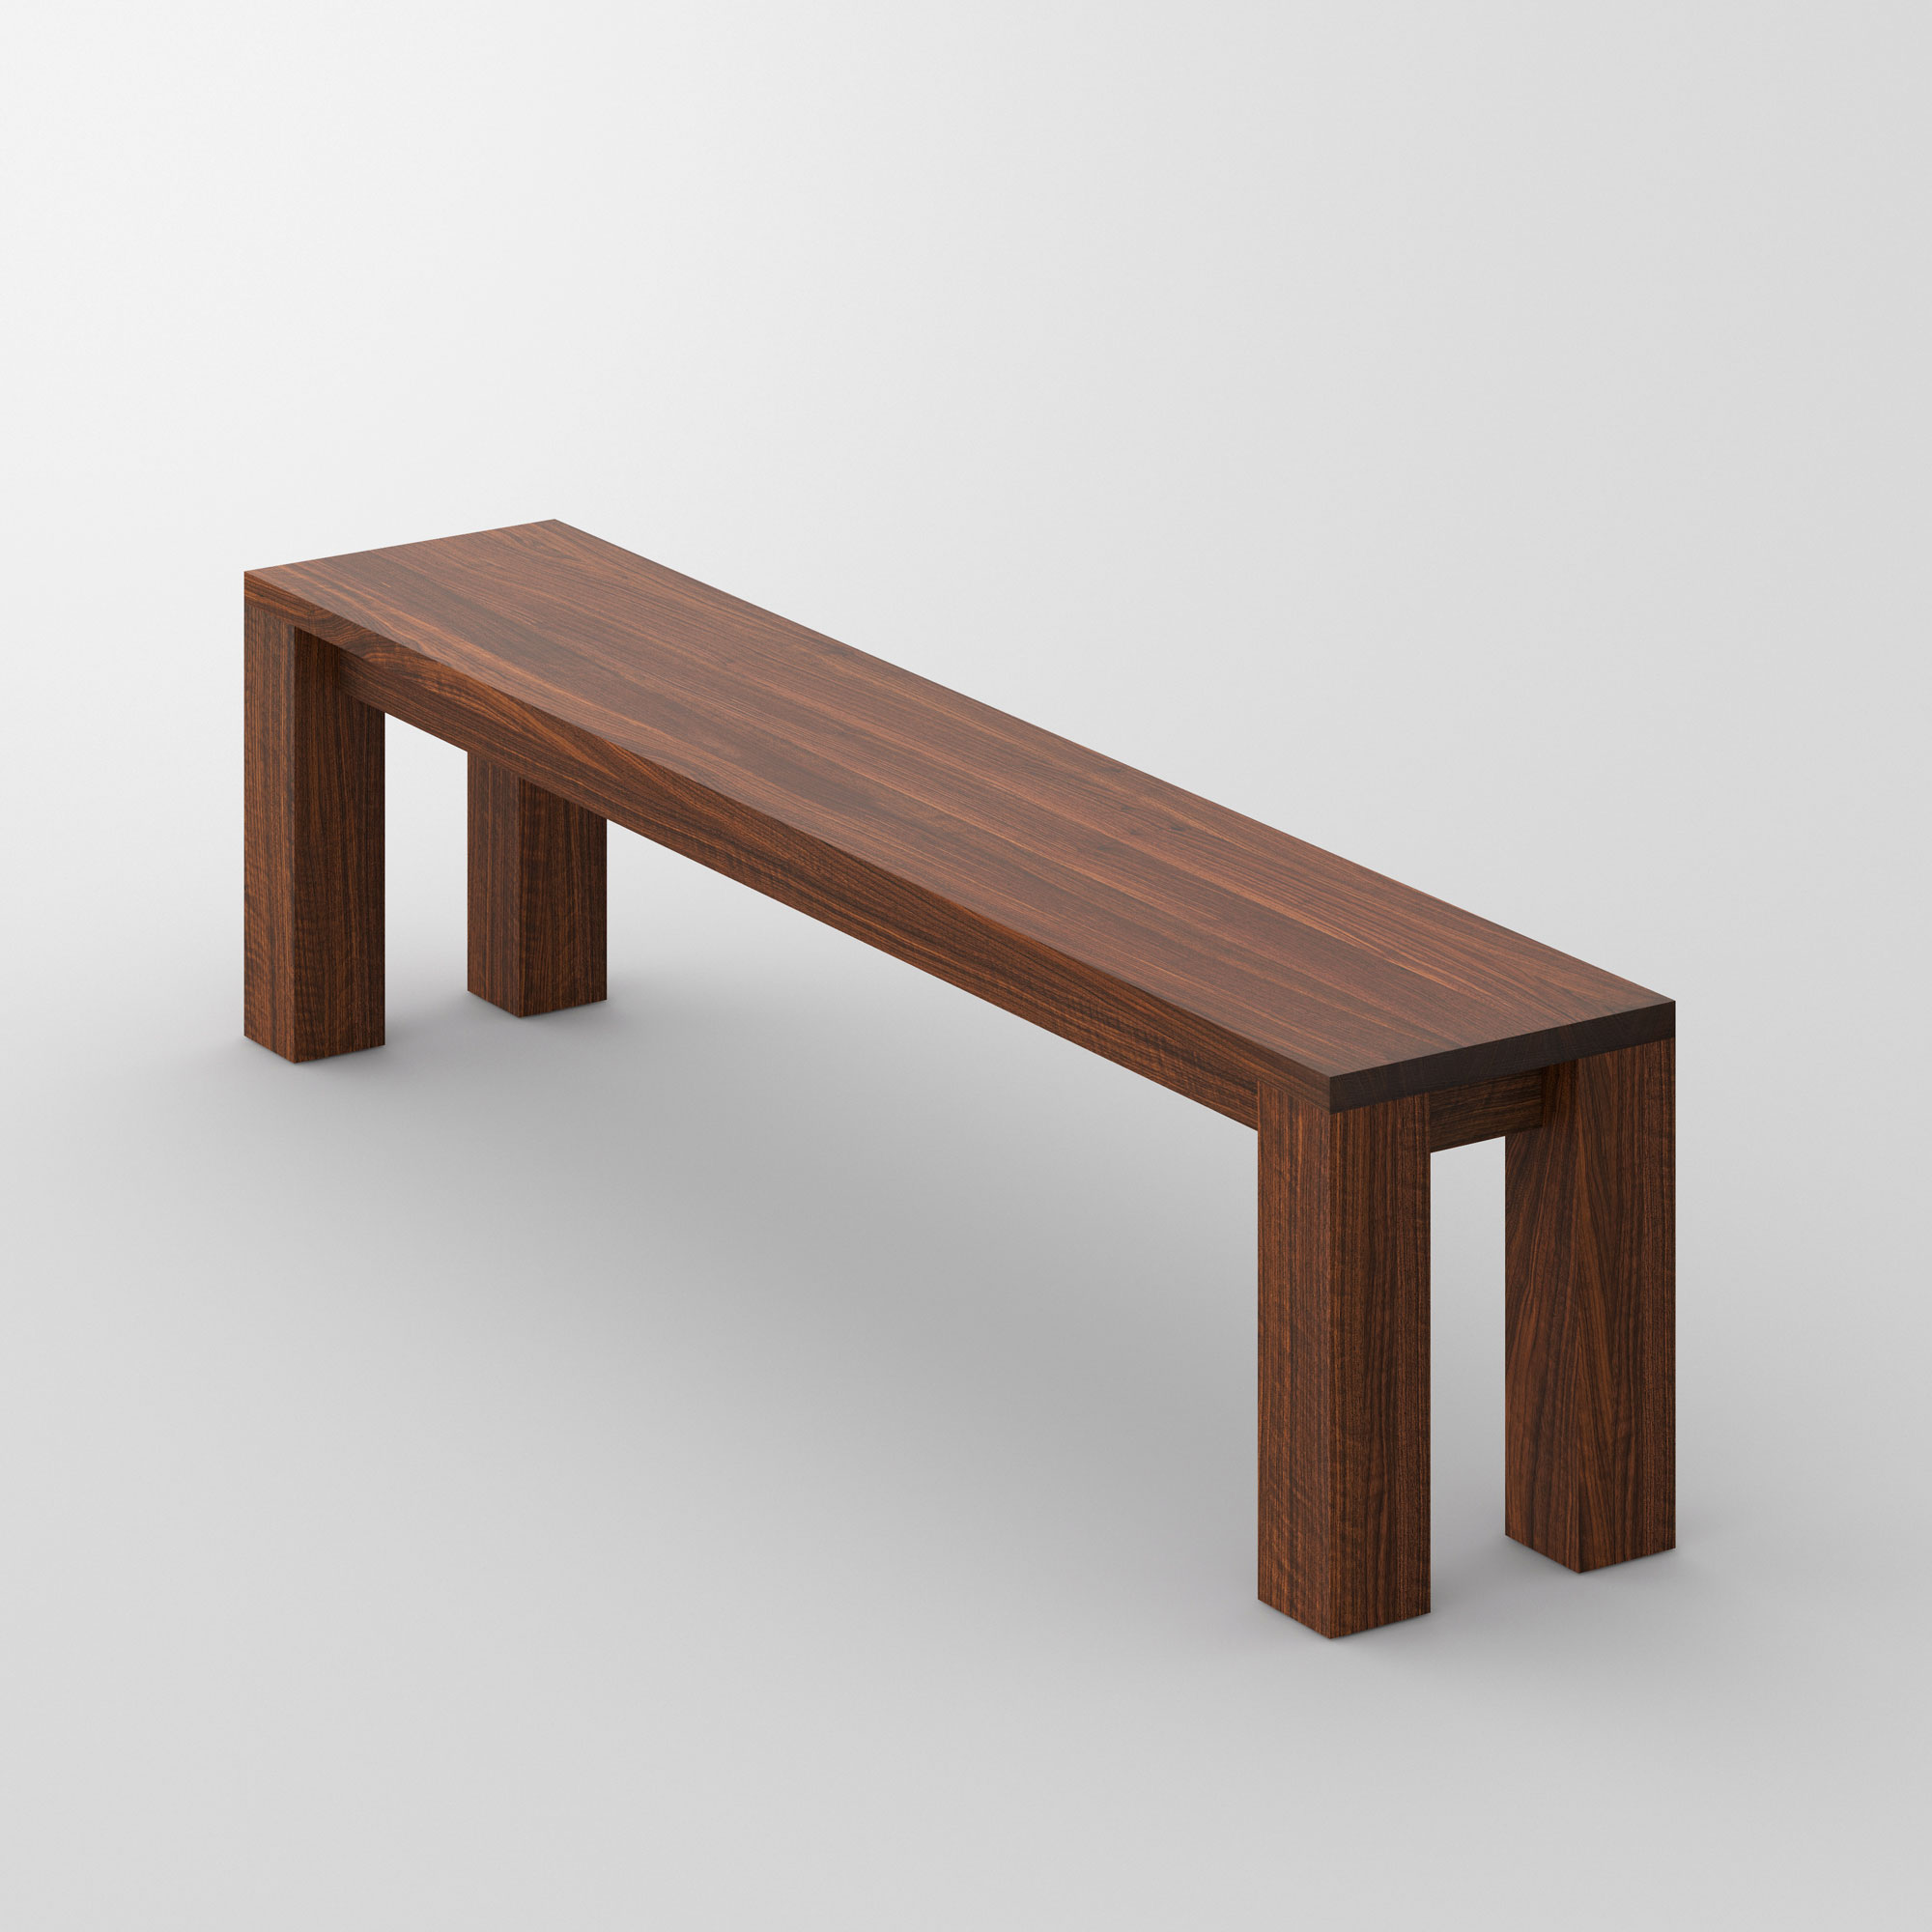 Rustic Wooden Bench CUBUS 3 cam3 custom made in solid wood by vitamin design